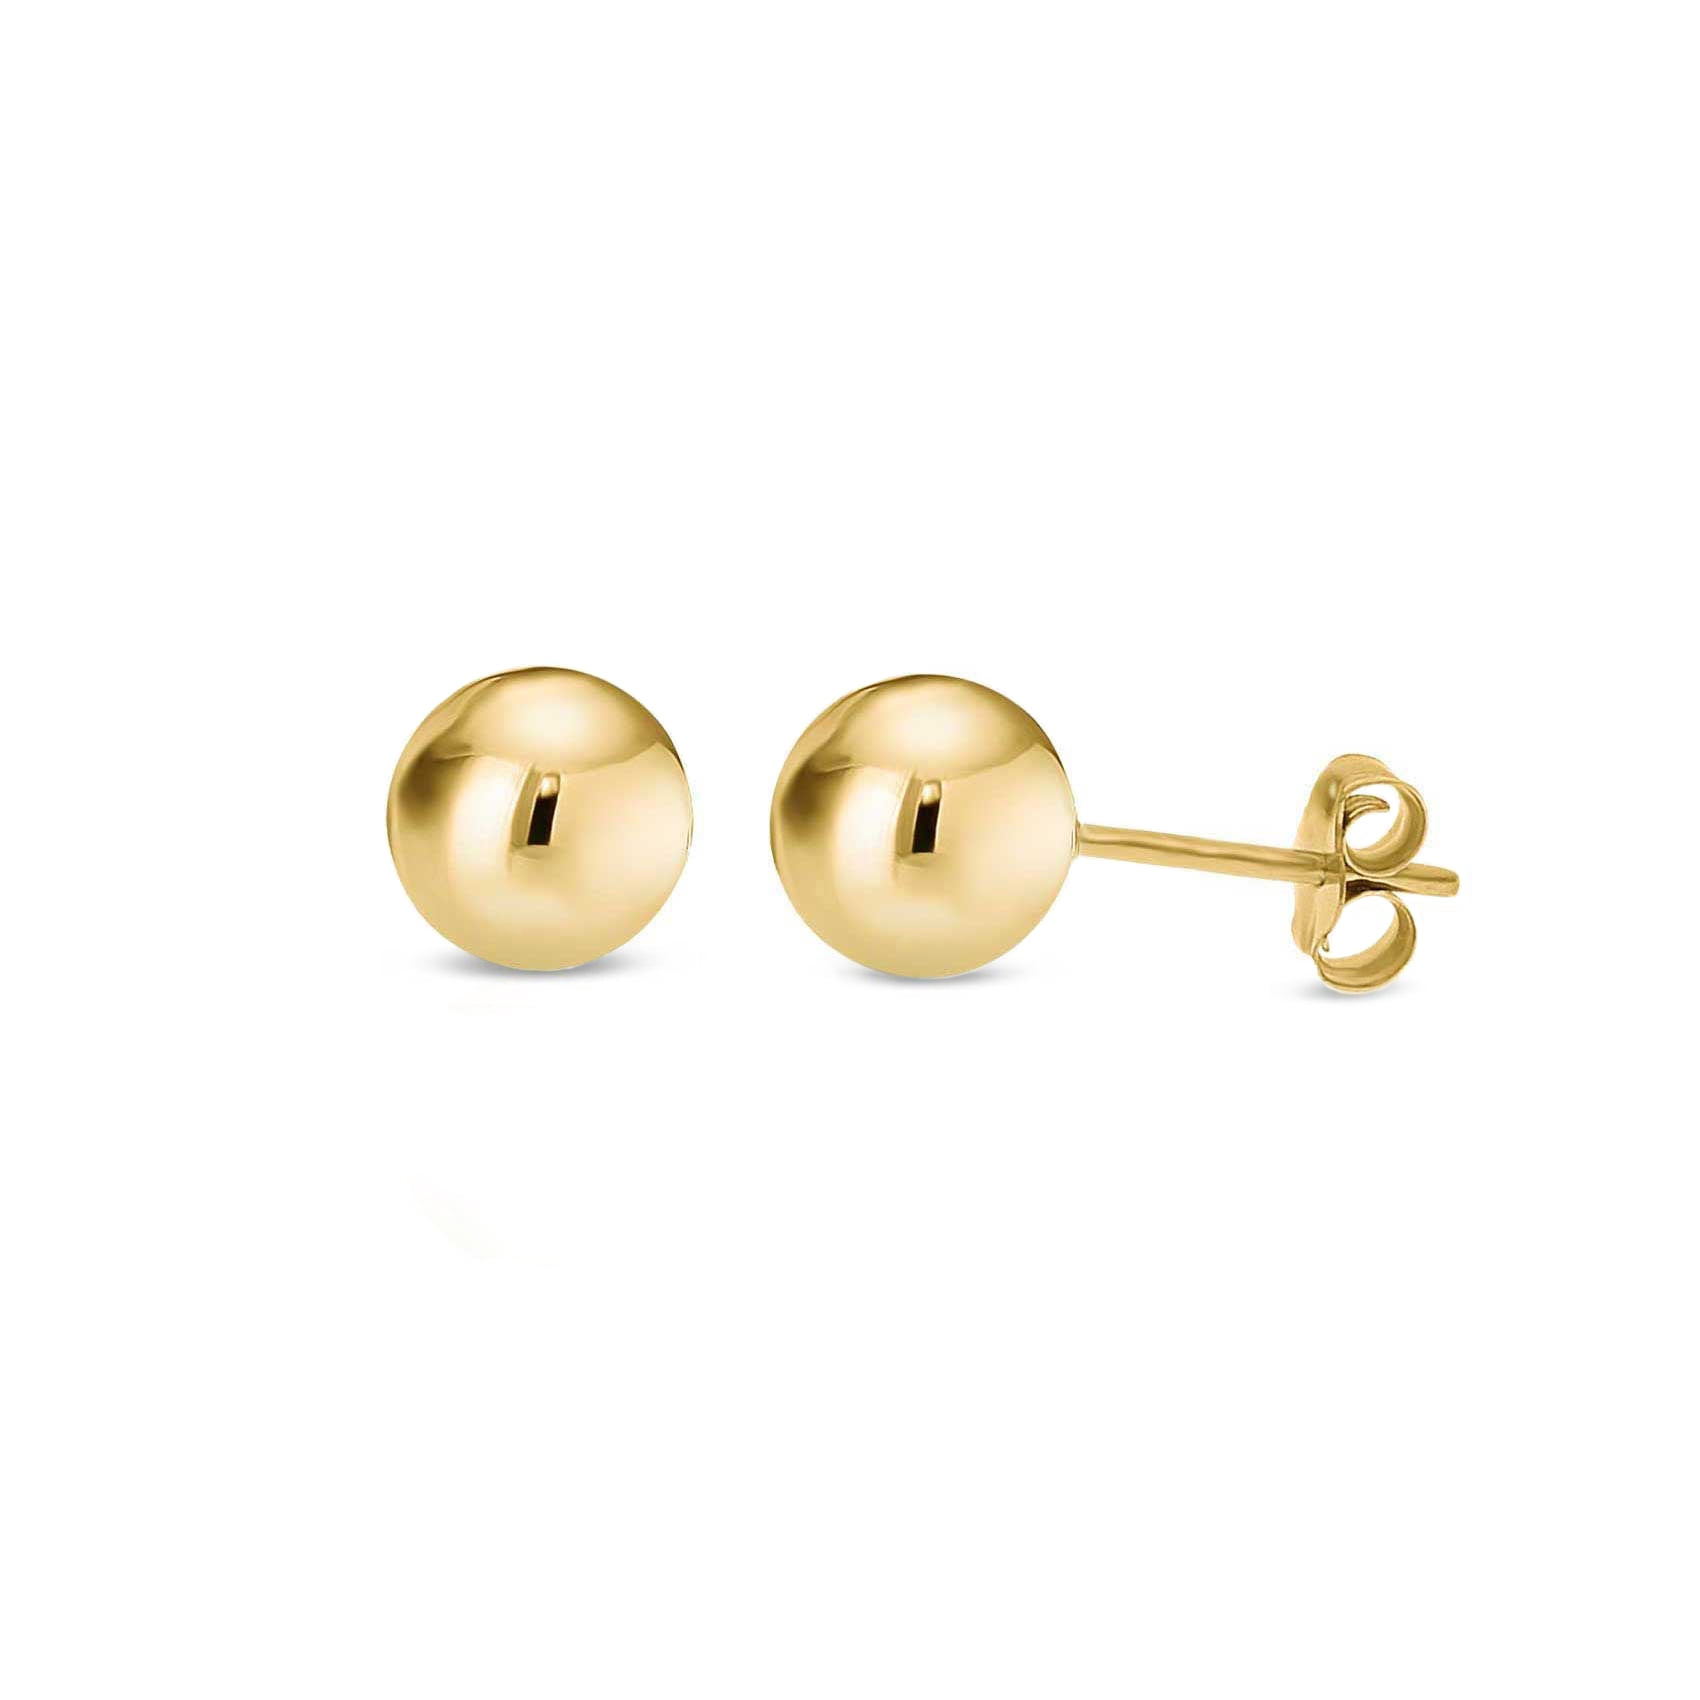 8mm Polished Ball Friction Back Stud Earrings in 14k Yellow Gold